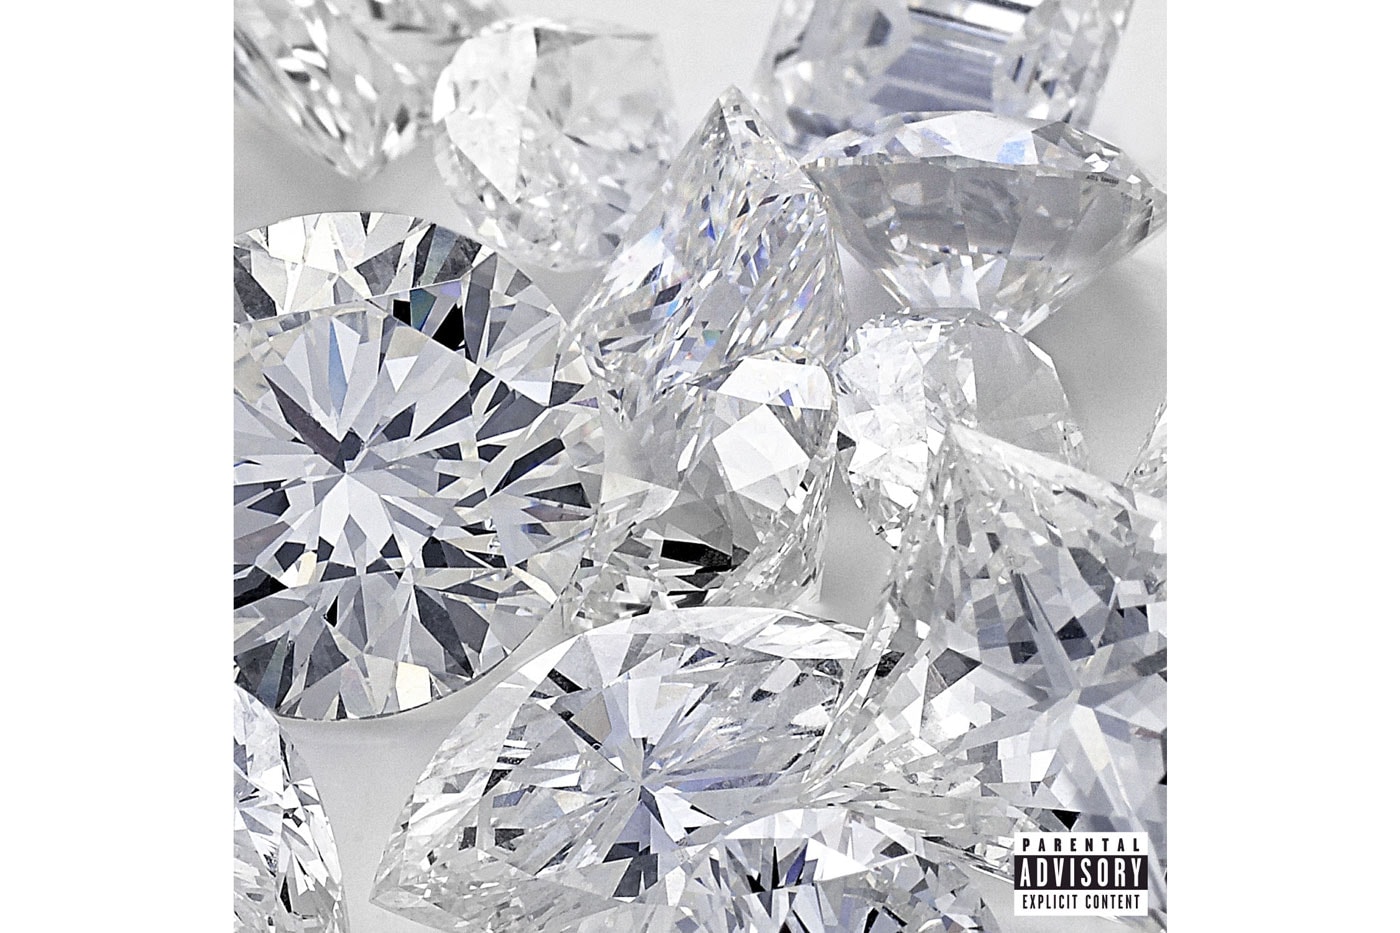 Sales Projections for Drake & Future's 'What A Time To Be Alive" Are In